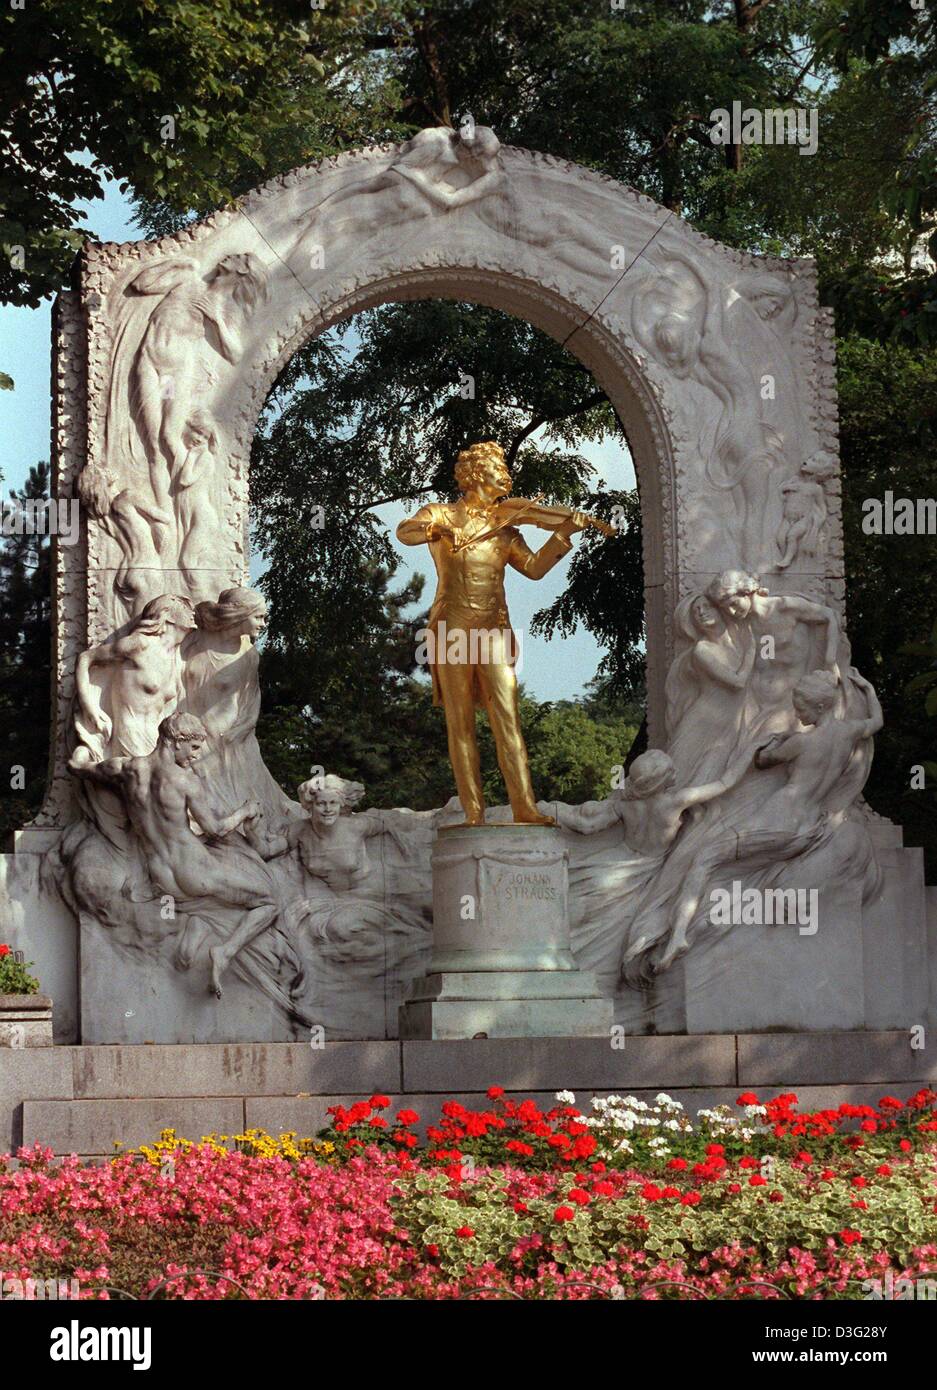 (dpa files) - A memorial for Austrian composer Johann Strauss Jr, the 'King of Waltz', stands in the municipal gardens (Stadtpark) in Vienna, Austria, 10 August 2000. The monument, created by Edmund Heller in 1921, shows Strauss playing the violin in front of heaven's gate. Johann Strauss Junior was born in Vienna on 25 October 1825 and died there on 3 June 1899. He is the composer Stock Photo